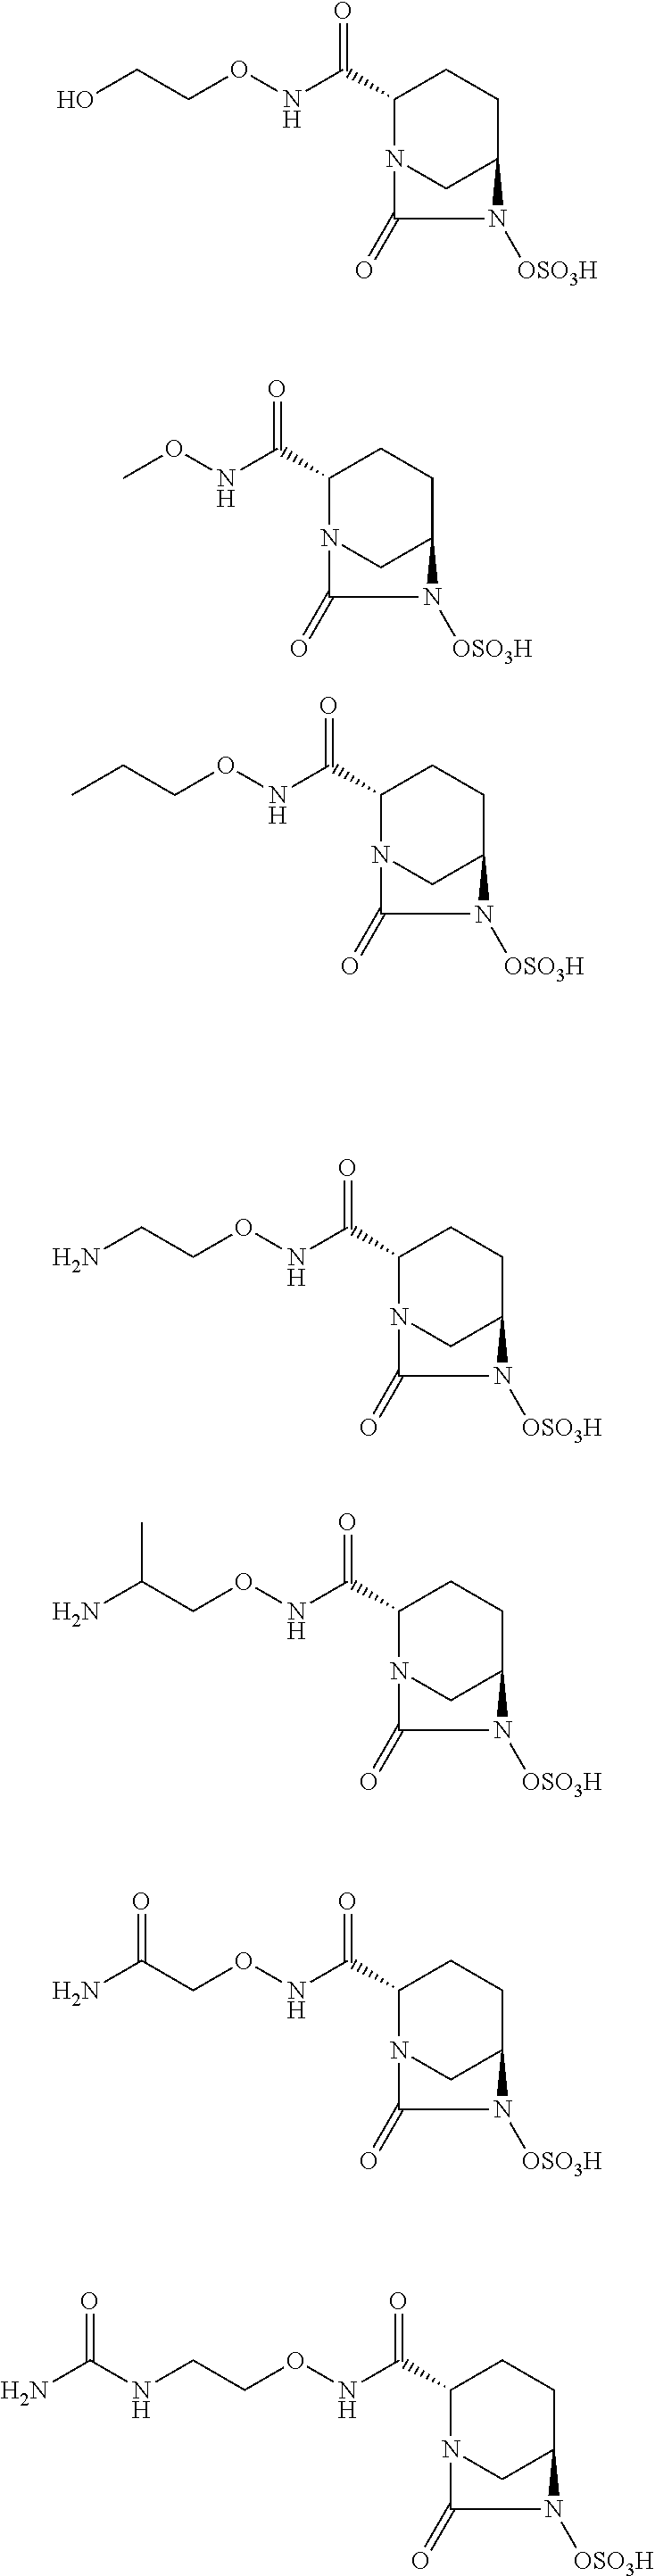 New bicyclic compounds and their use as antibacterial agents and beta-lactamase inhibitors